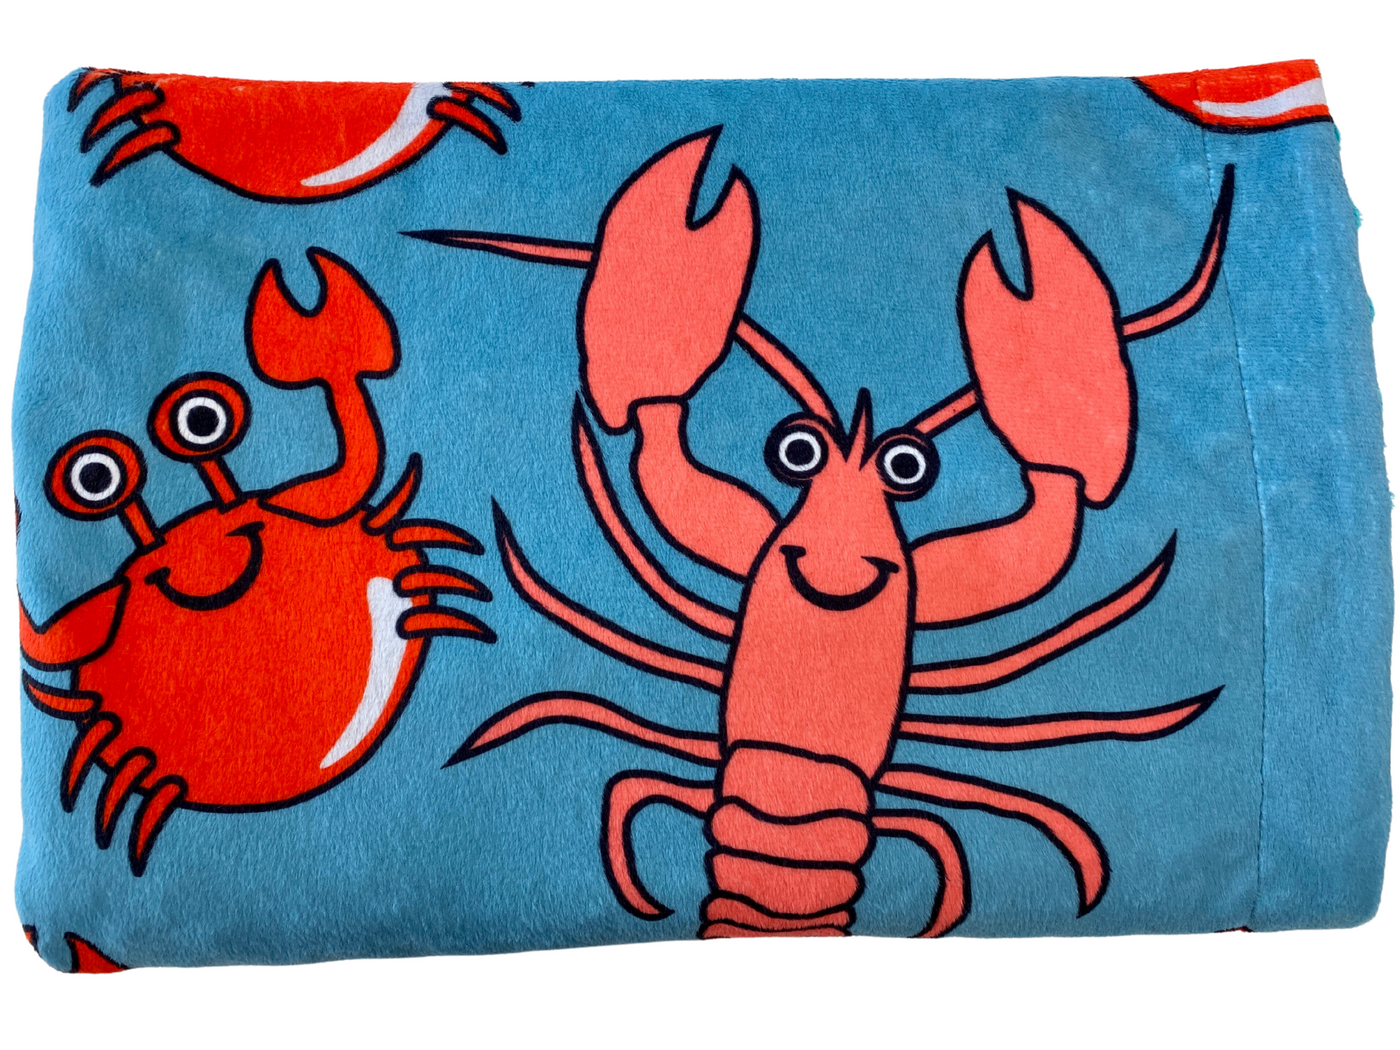 Baby blanket: Lobsters and crabs